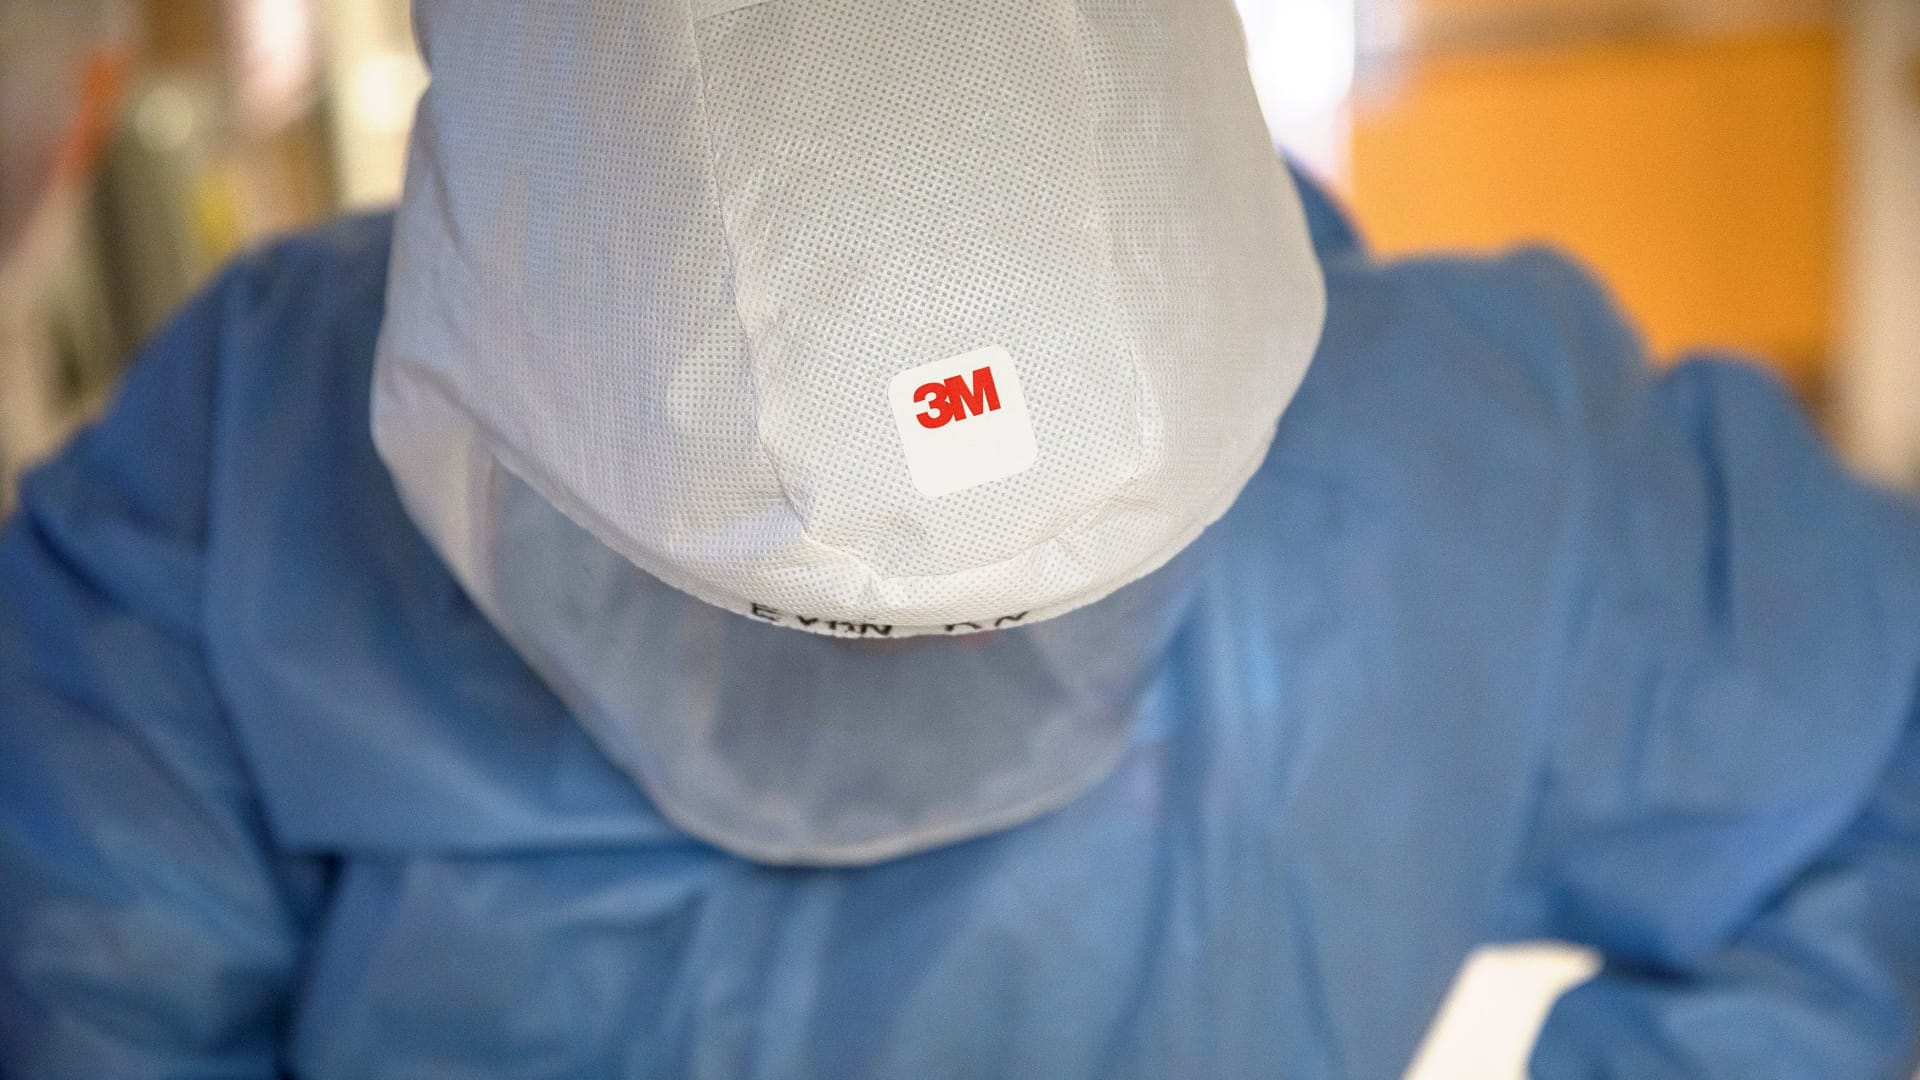 3M will spin off its healthcare business into a new public company